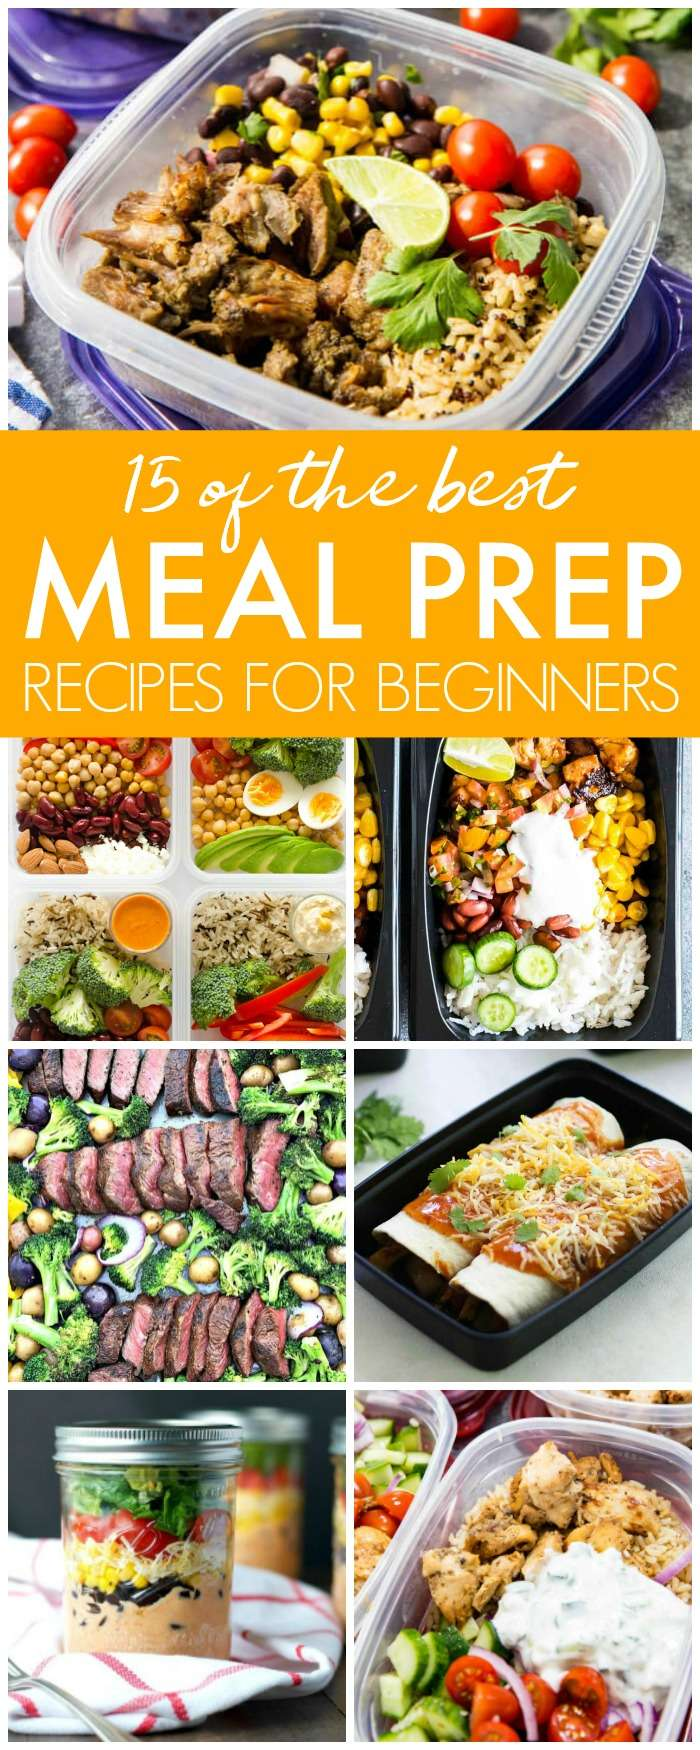 15 of the Best Meal Prep Recipes - Passion For Savings -   18 meal prep recipes for beginners cheap ideas